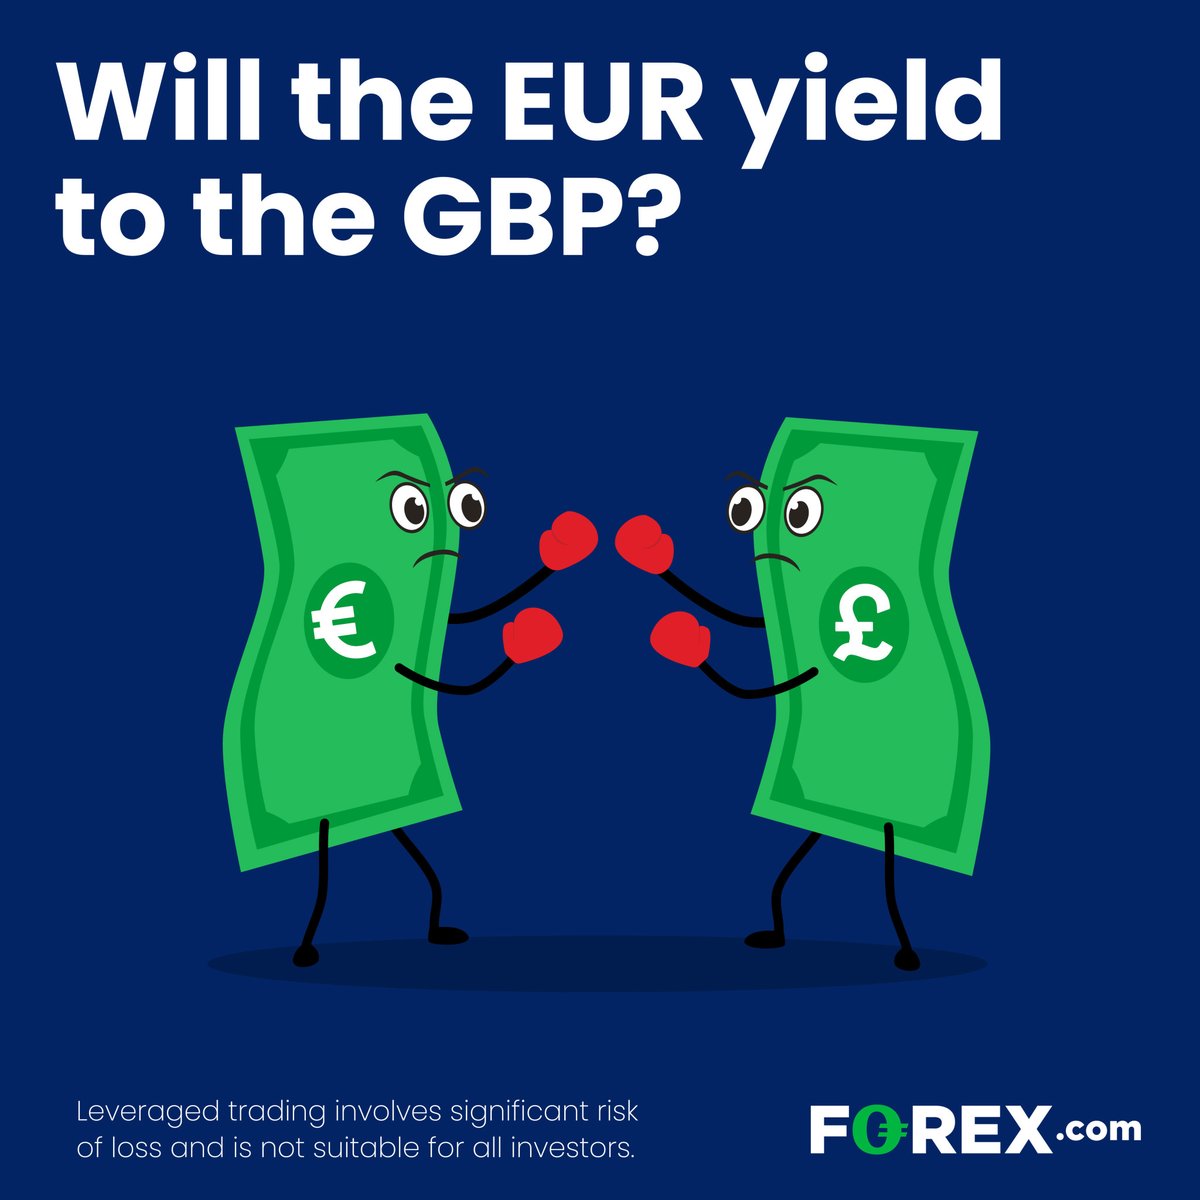 Ditch the euro, said BNP Paribas on Mar. 15, because “GBP valuations are cheap, and we expect U.K. yields to remain elevated compared to the rest of the world.” Is it just the fundamentals, or do the technicals support a EUR/GBP drop to 0.83?